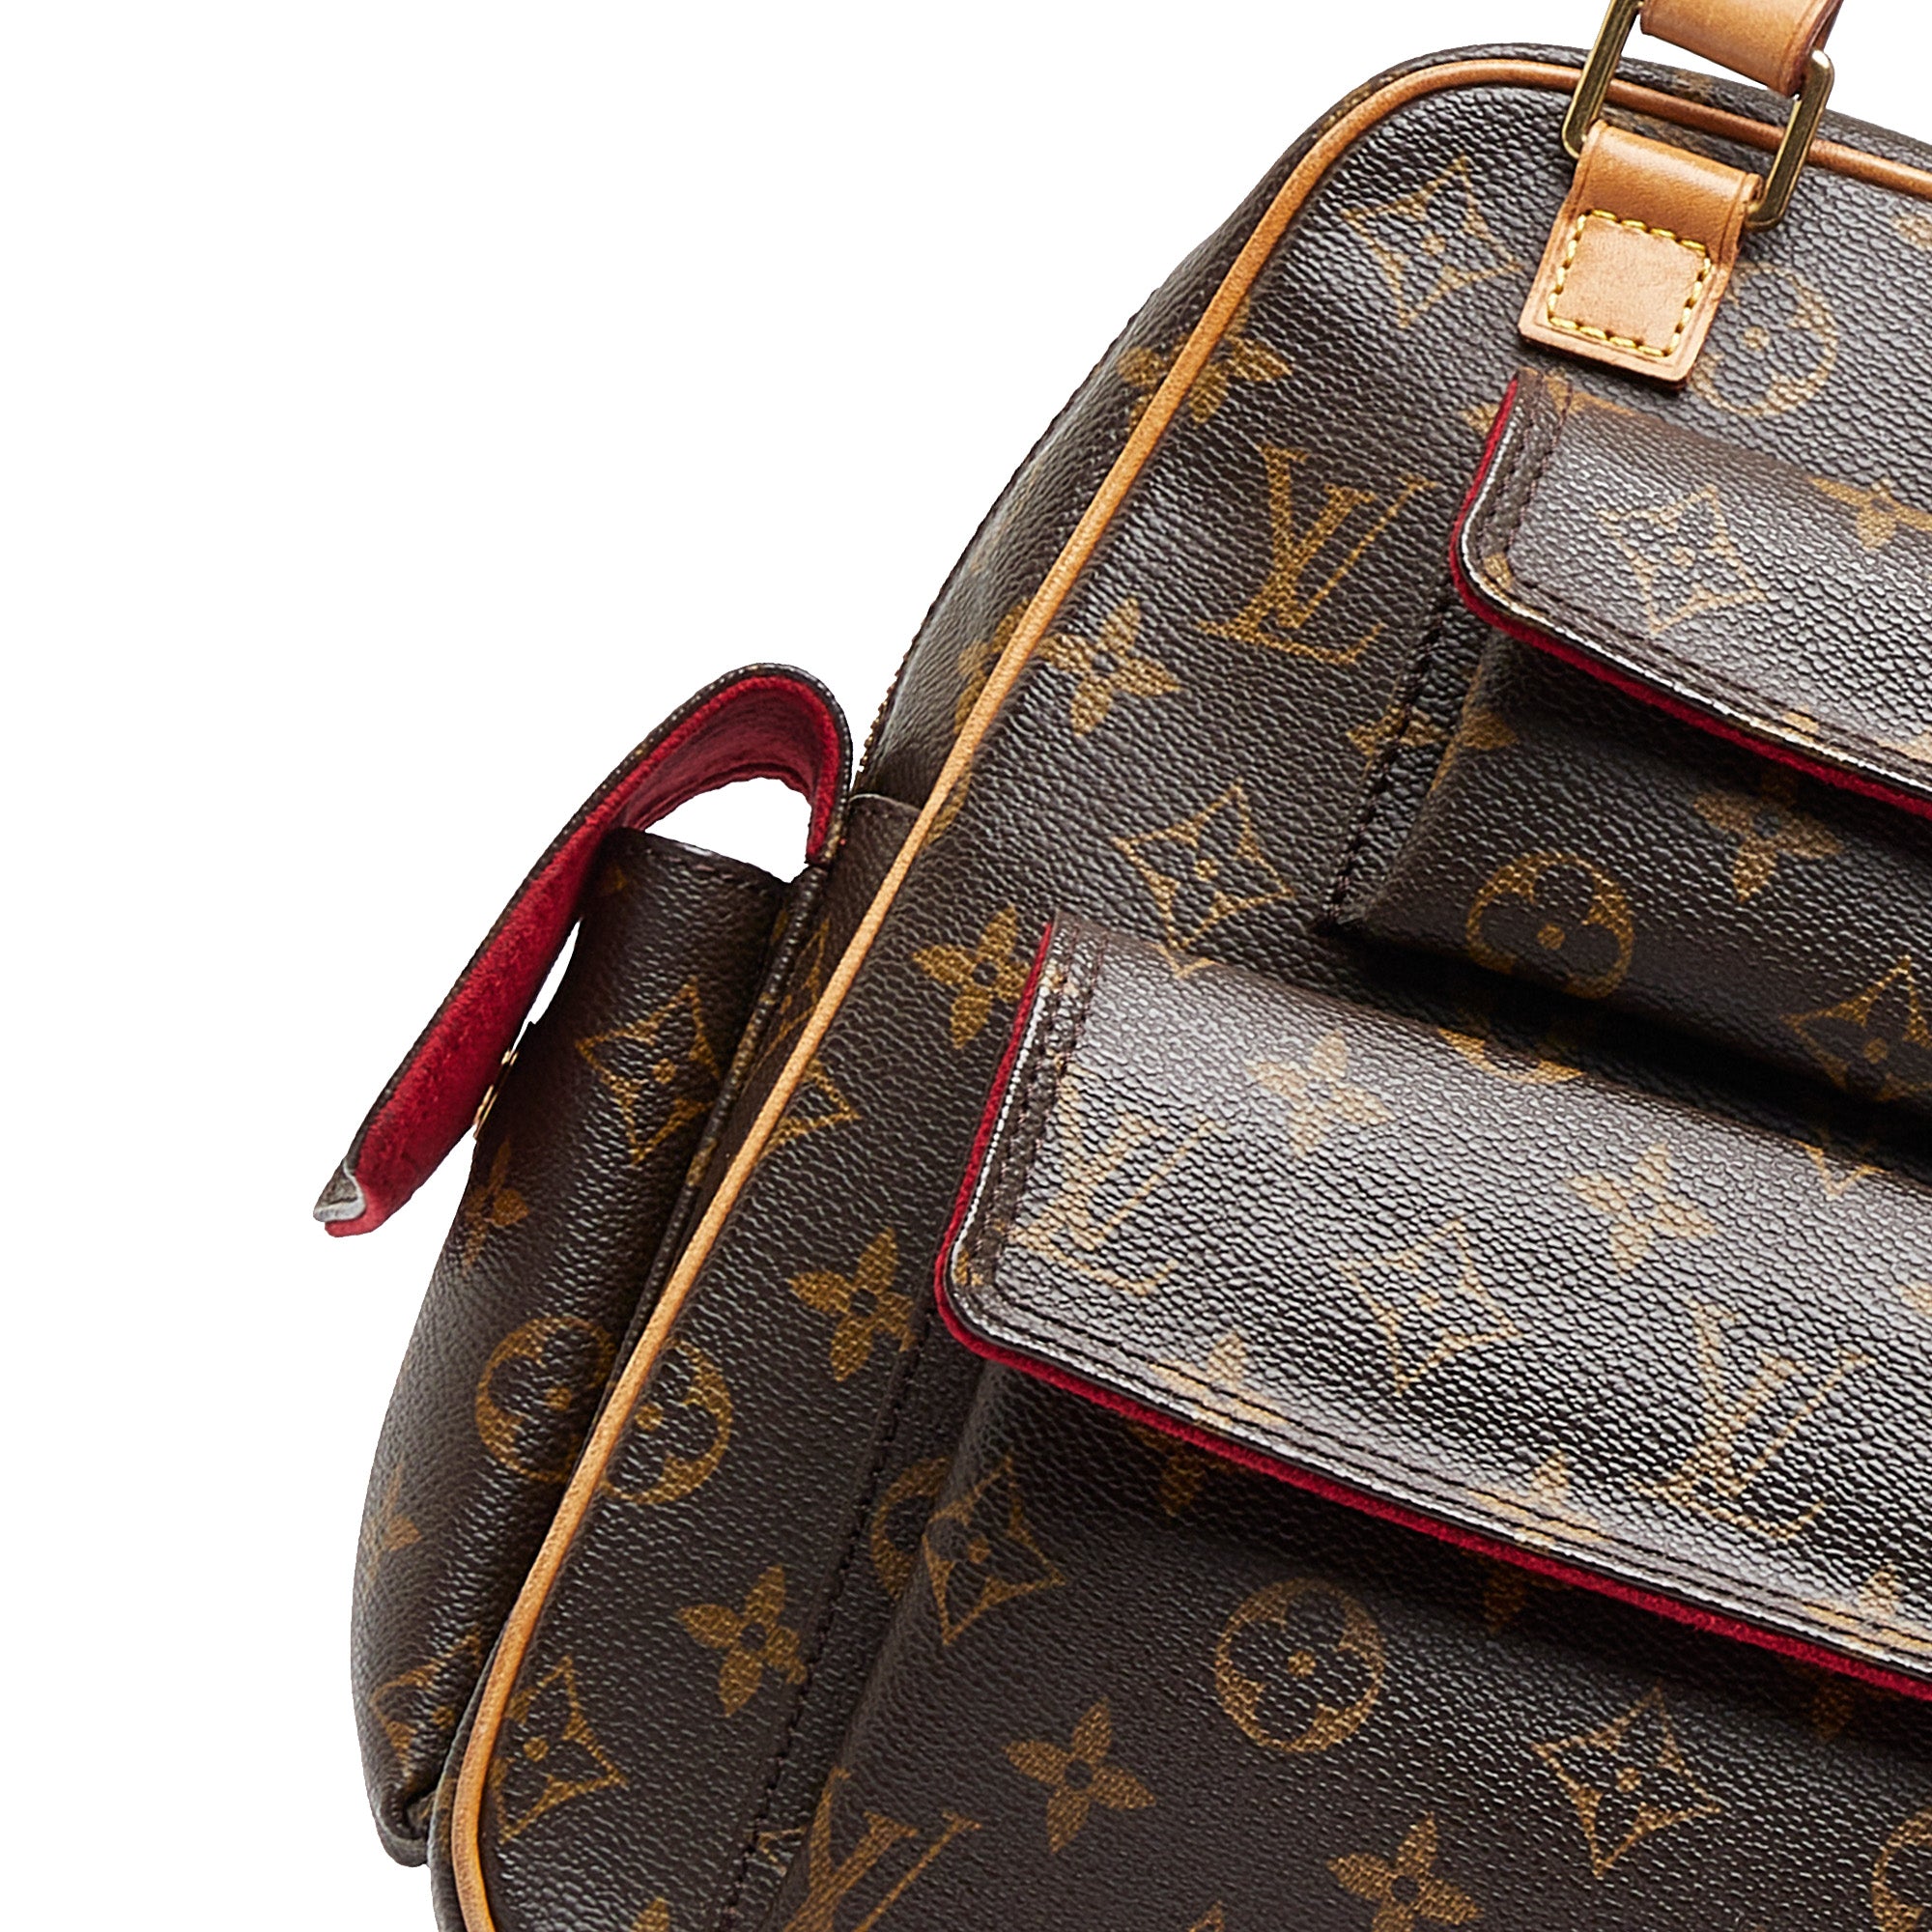 Where to Find the Date Code of Louis Vuitton Excentri-cite